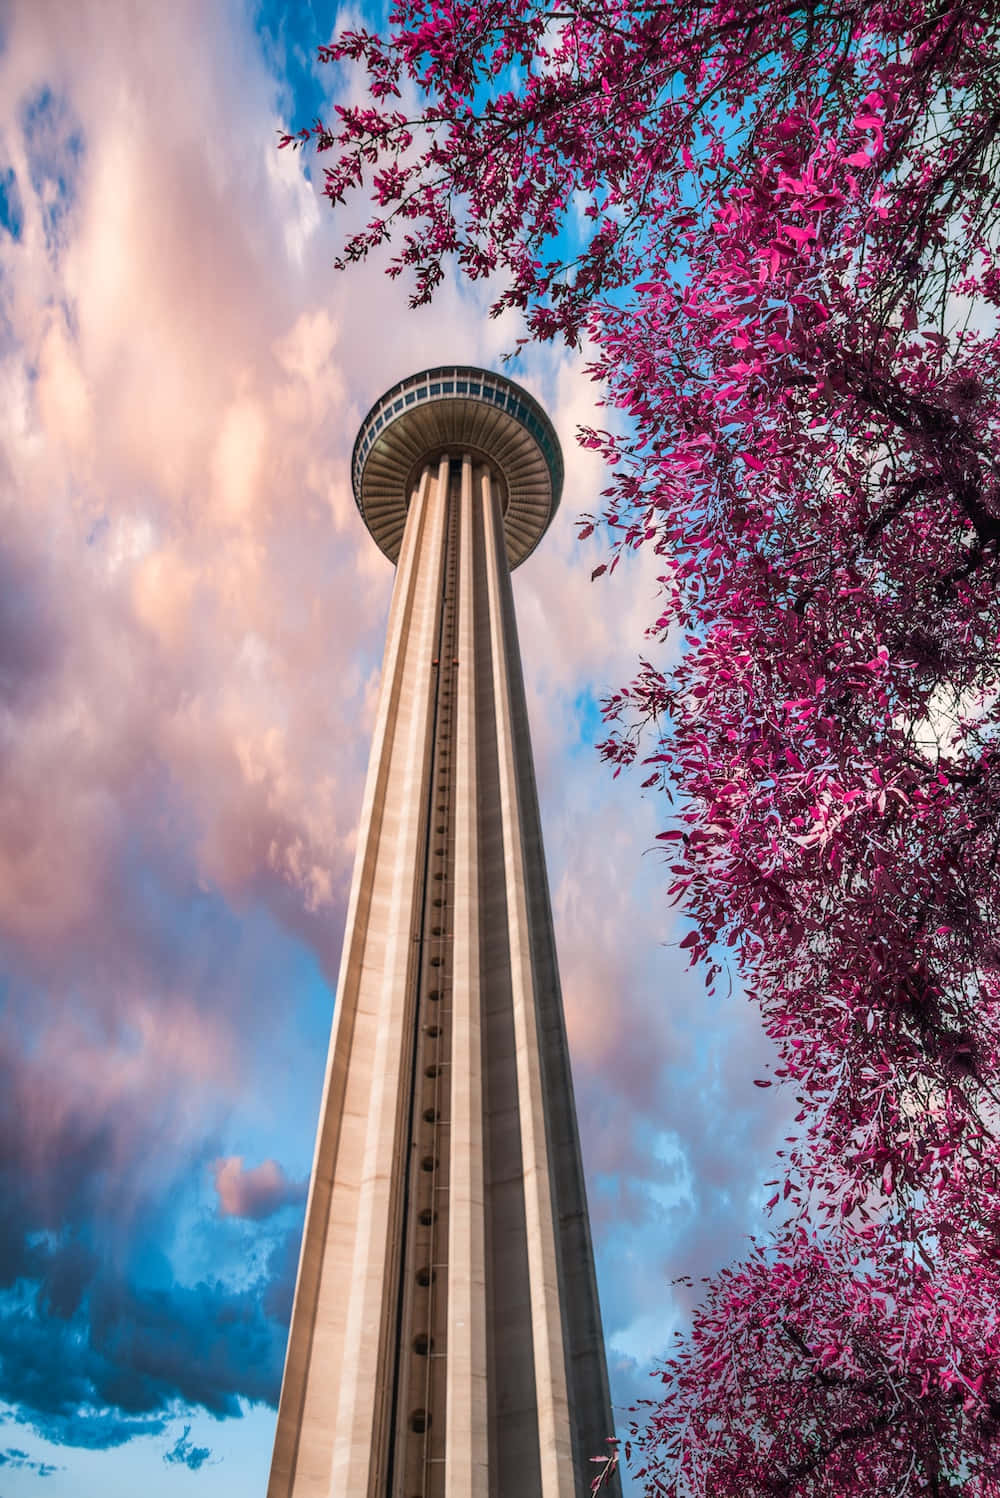 A Tower With Pink Blossoms In The Background